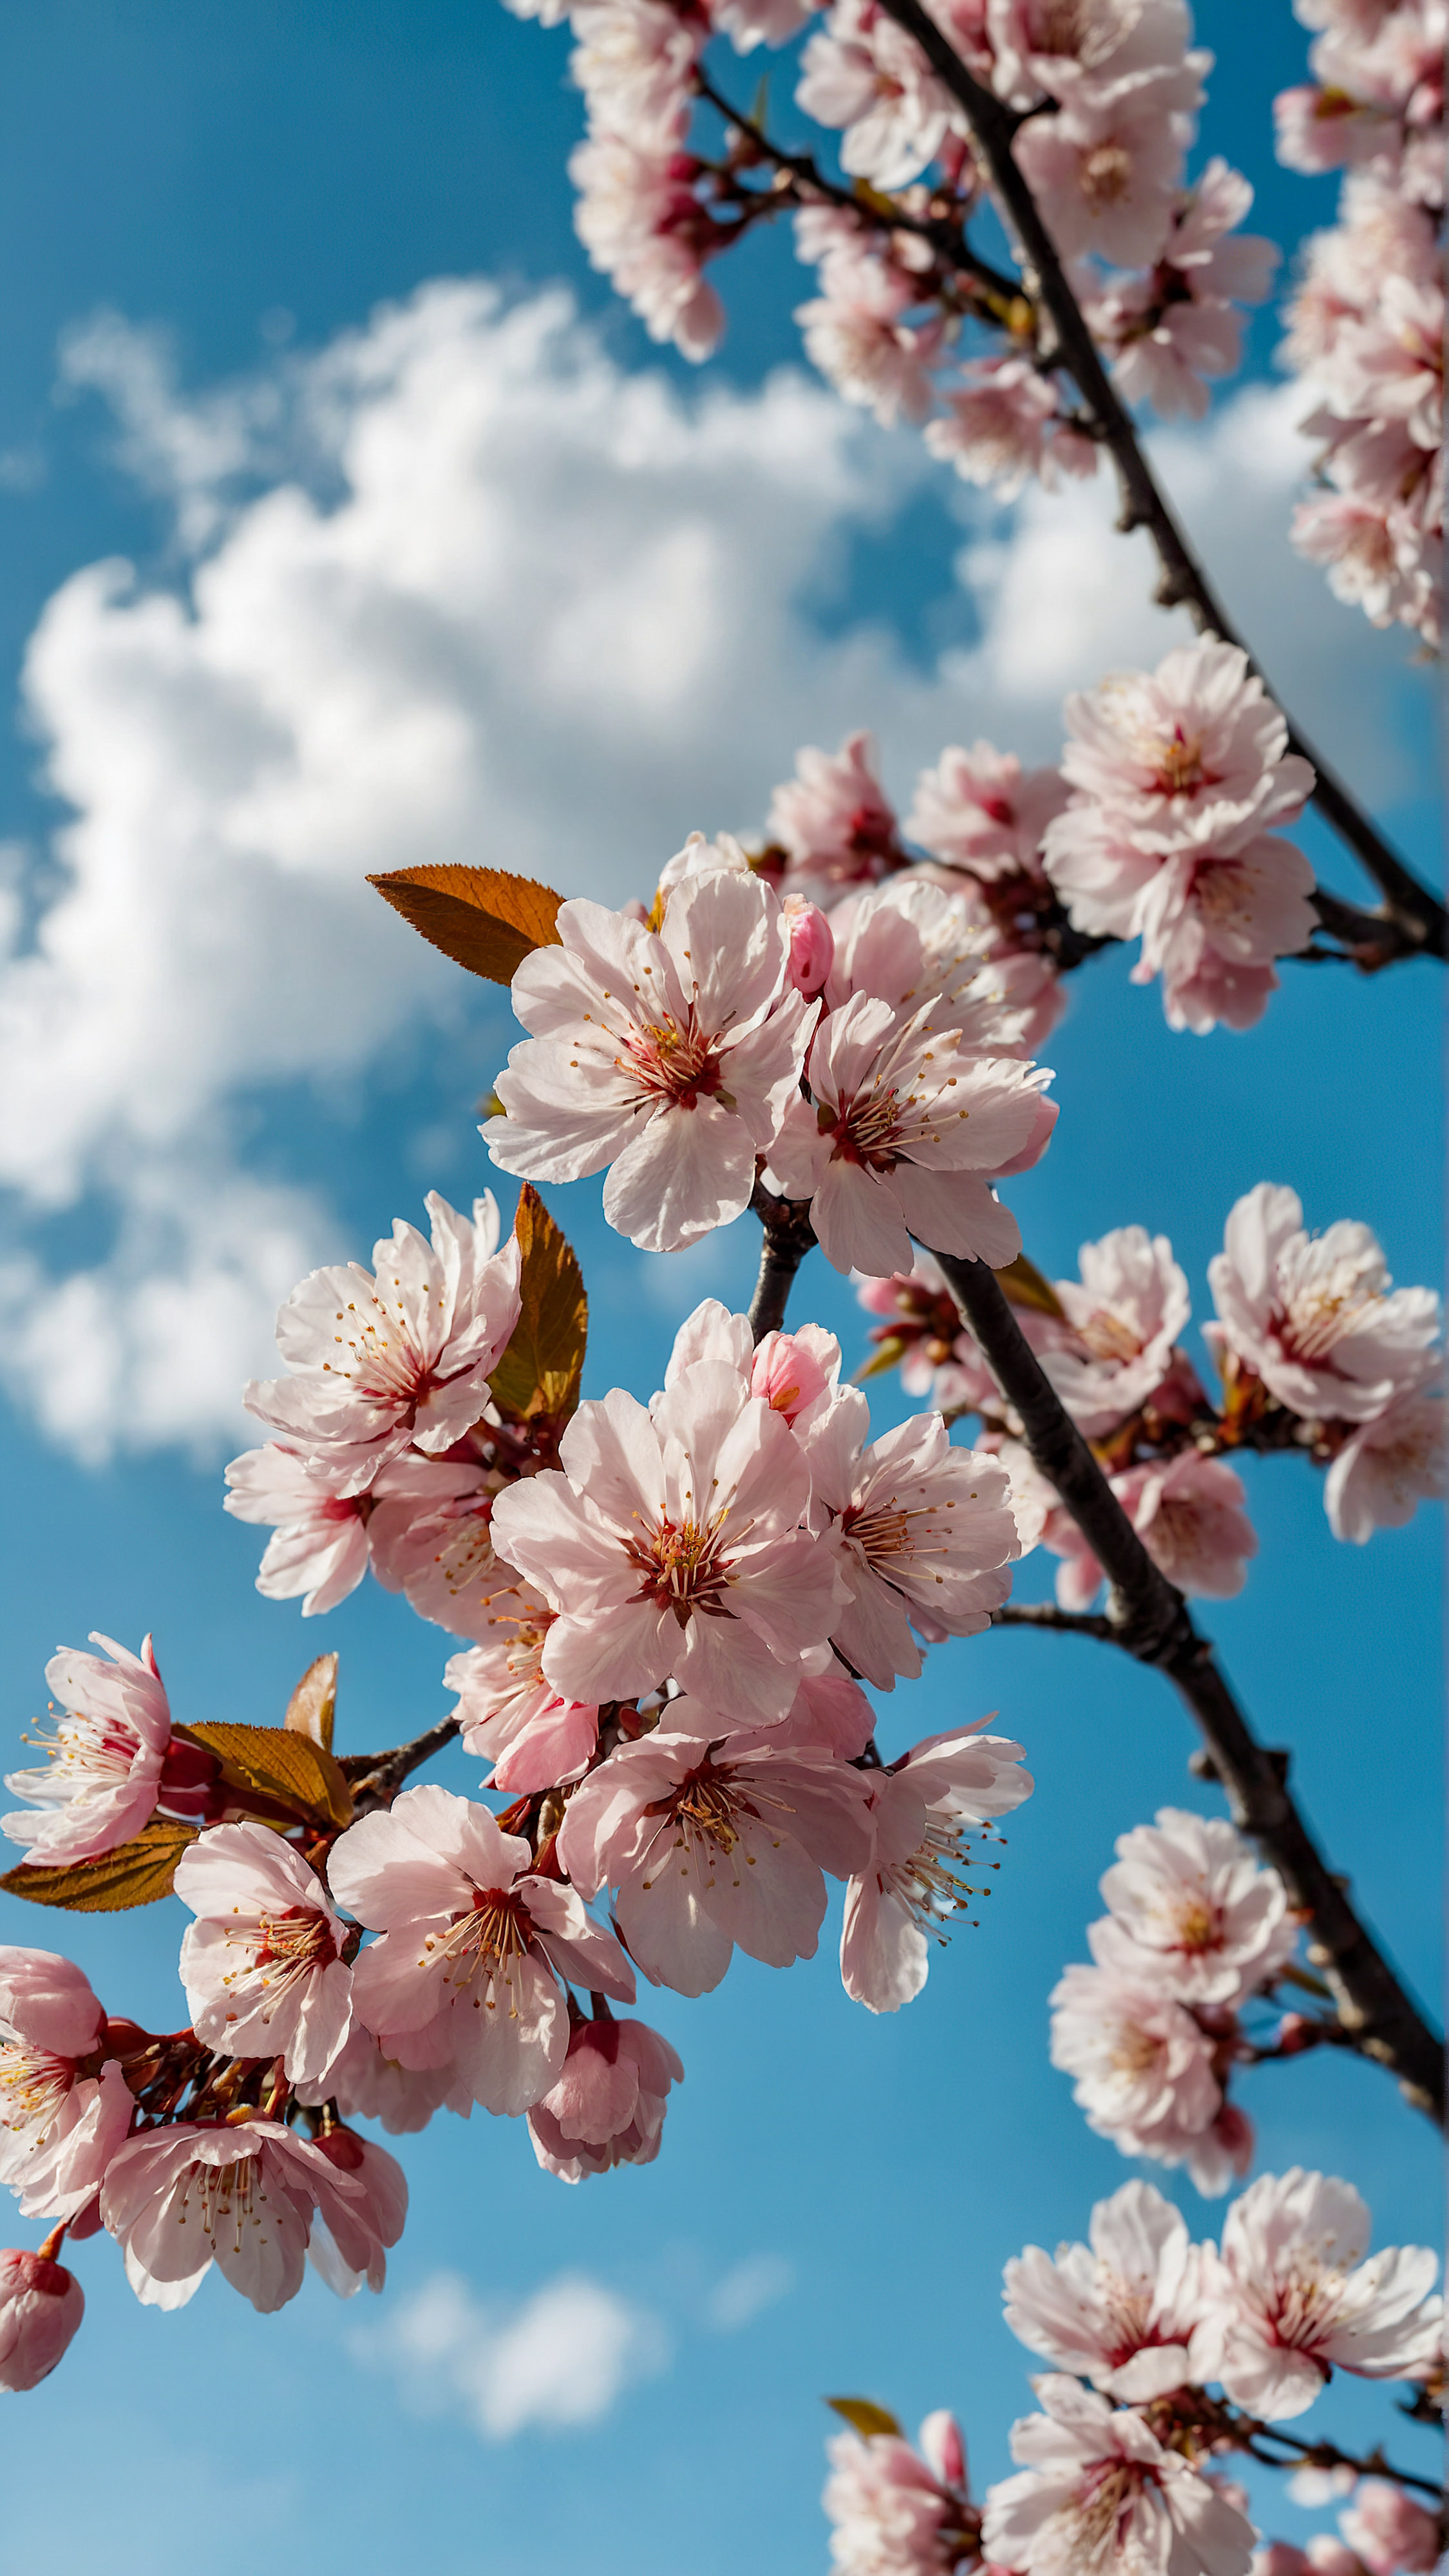 Adorn your device with the serene beauty of pink cherry blossoms against a backdrop of a clear blue sky with fluffy white clouds with our aesthetic cute iPhone wallpaper.